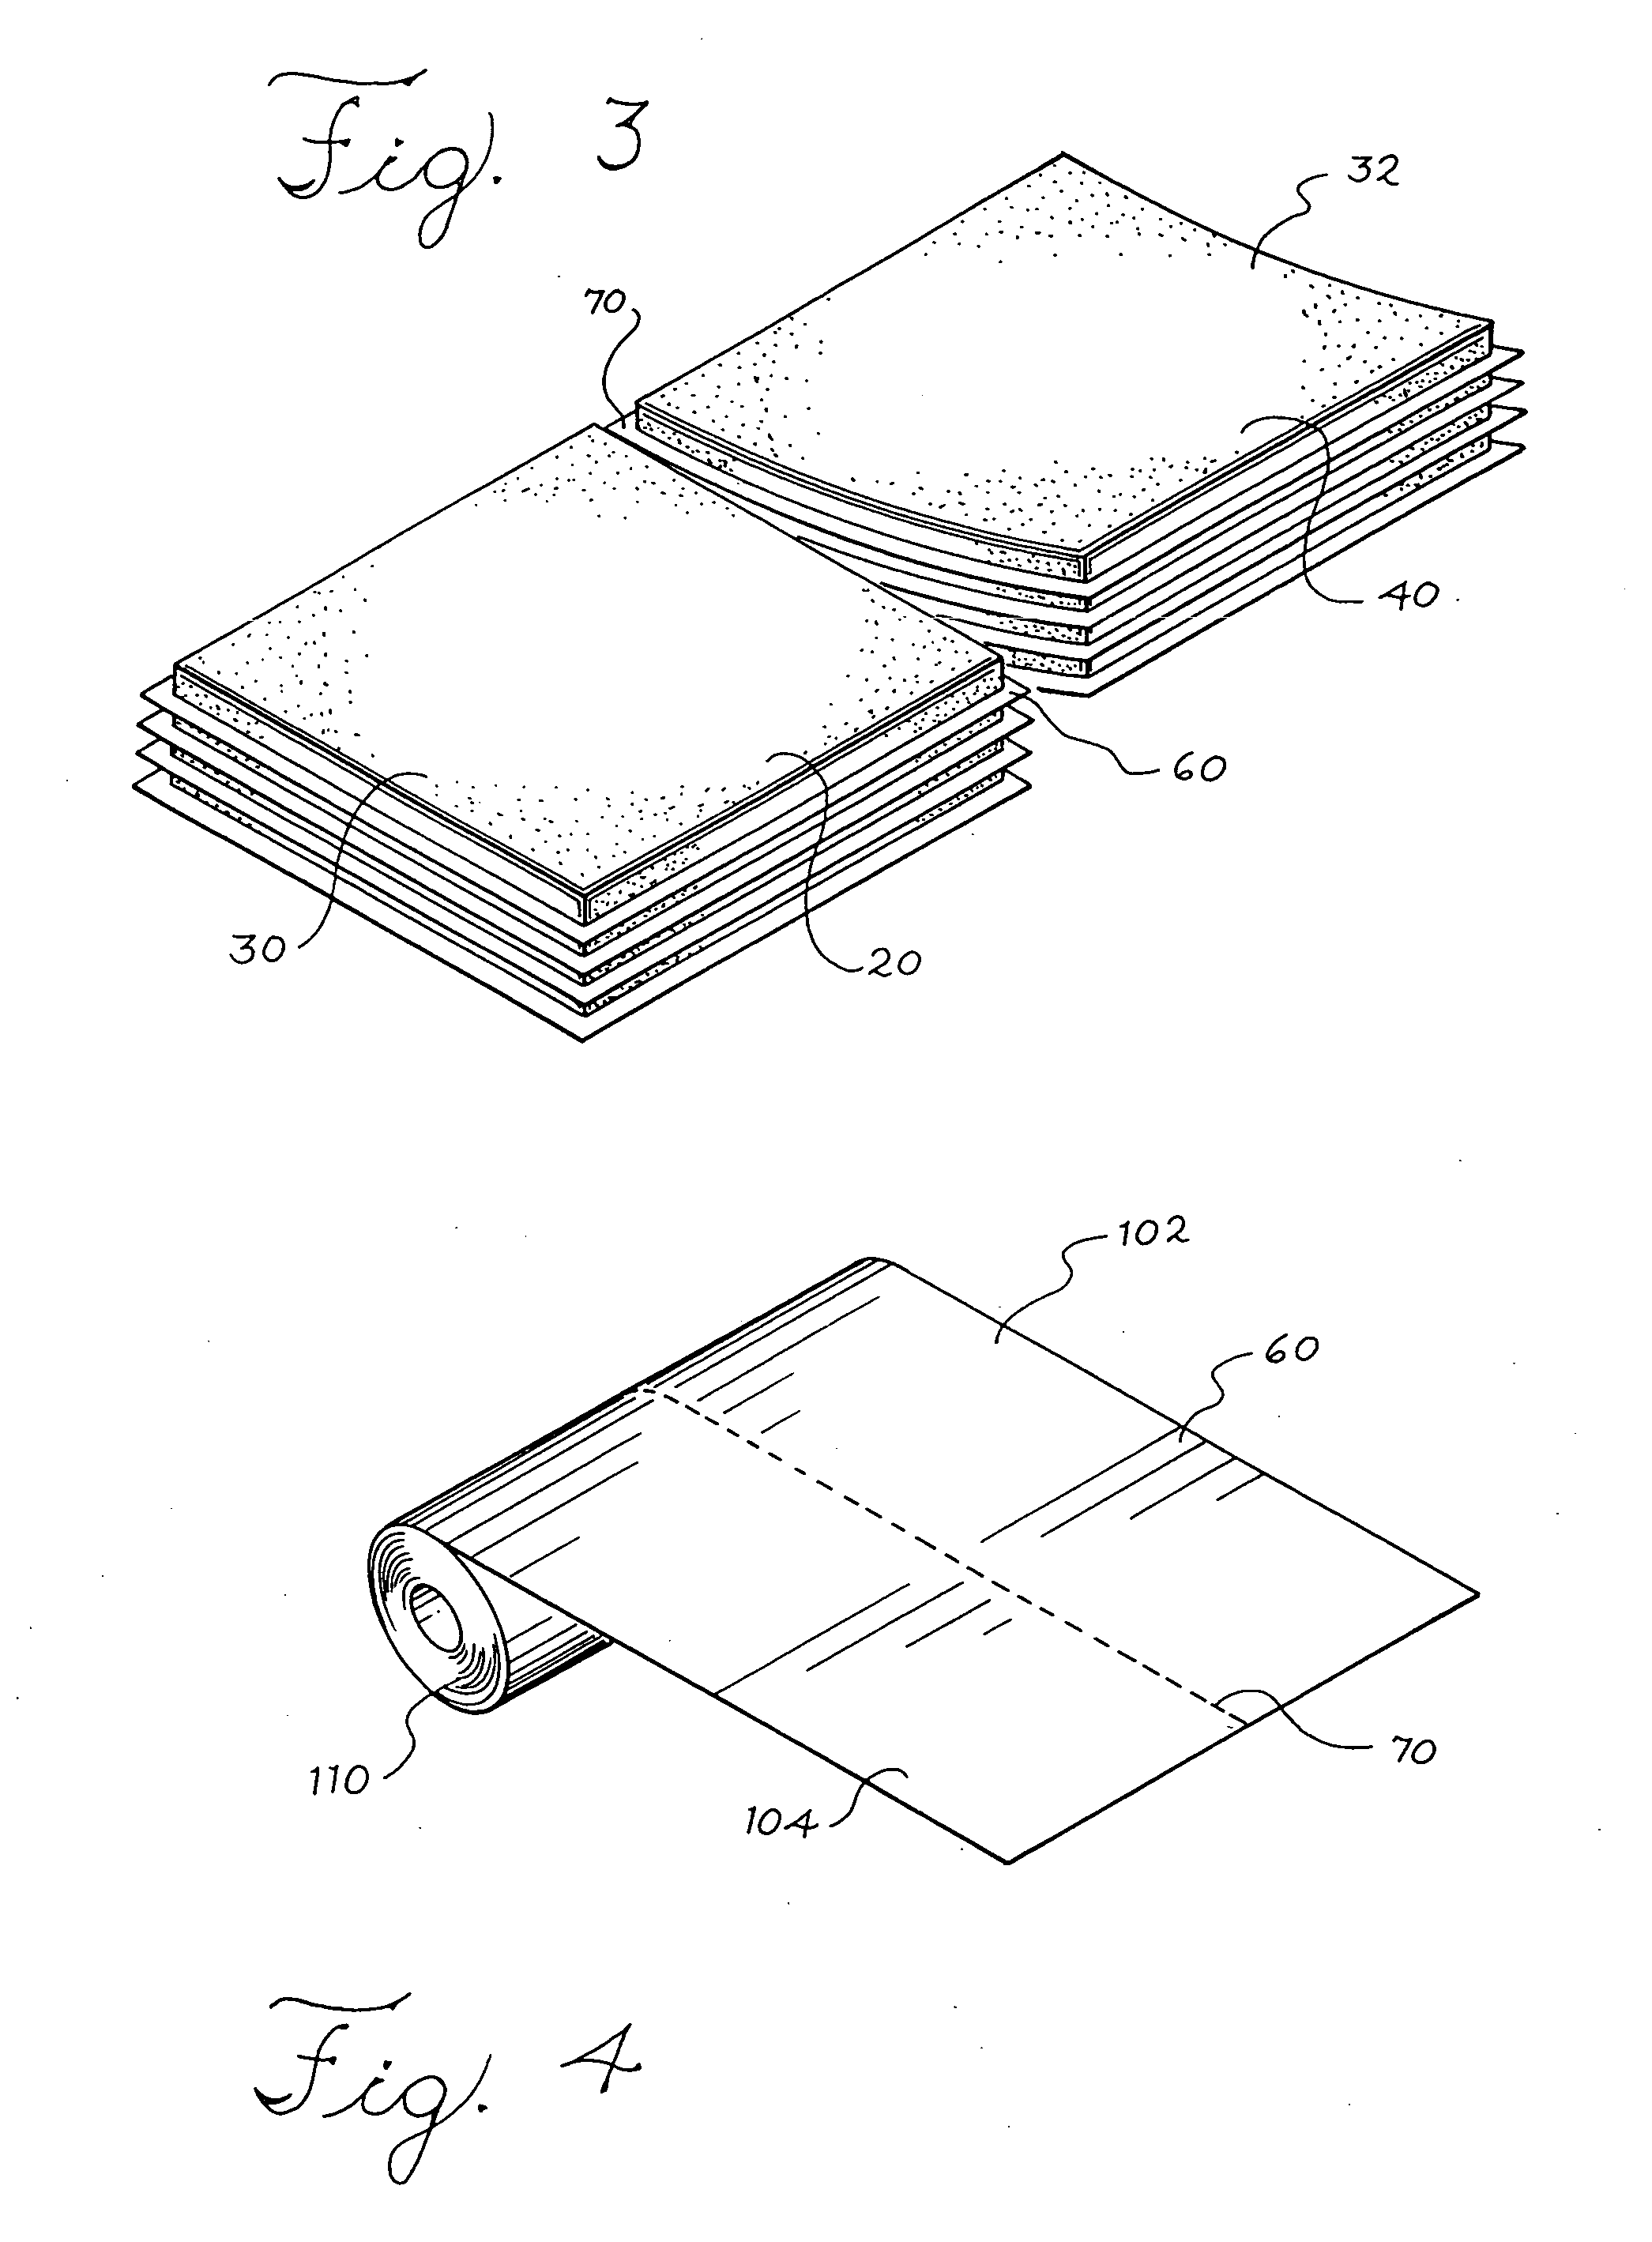 Apparatus and method for separating stacks of food products slices